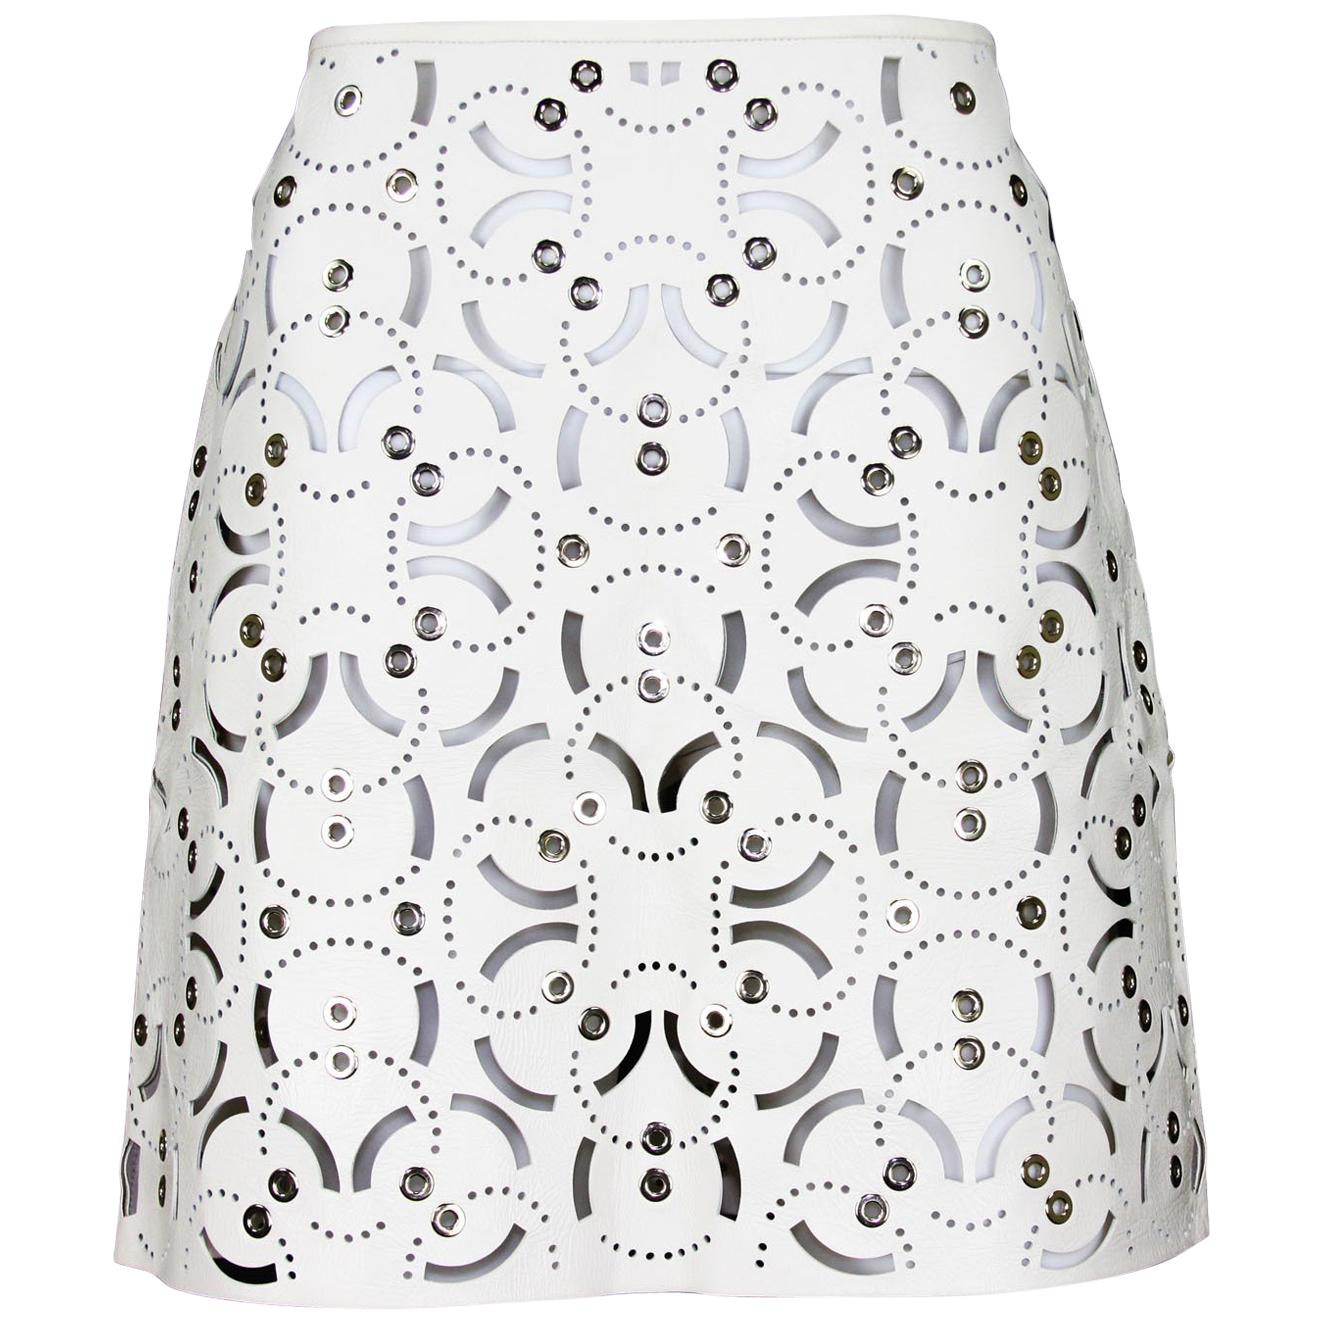 New Versace Runway Laser Cut Silver Tone Grommet White Leather Skirt  It. 40 - 6 For Sale